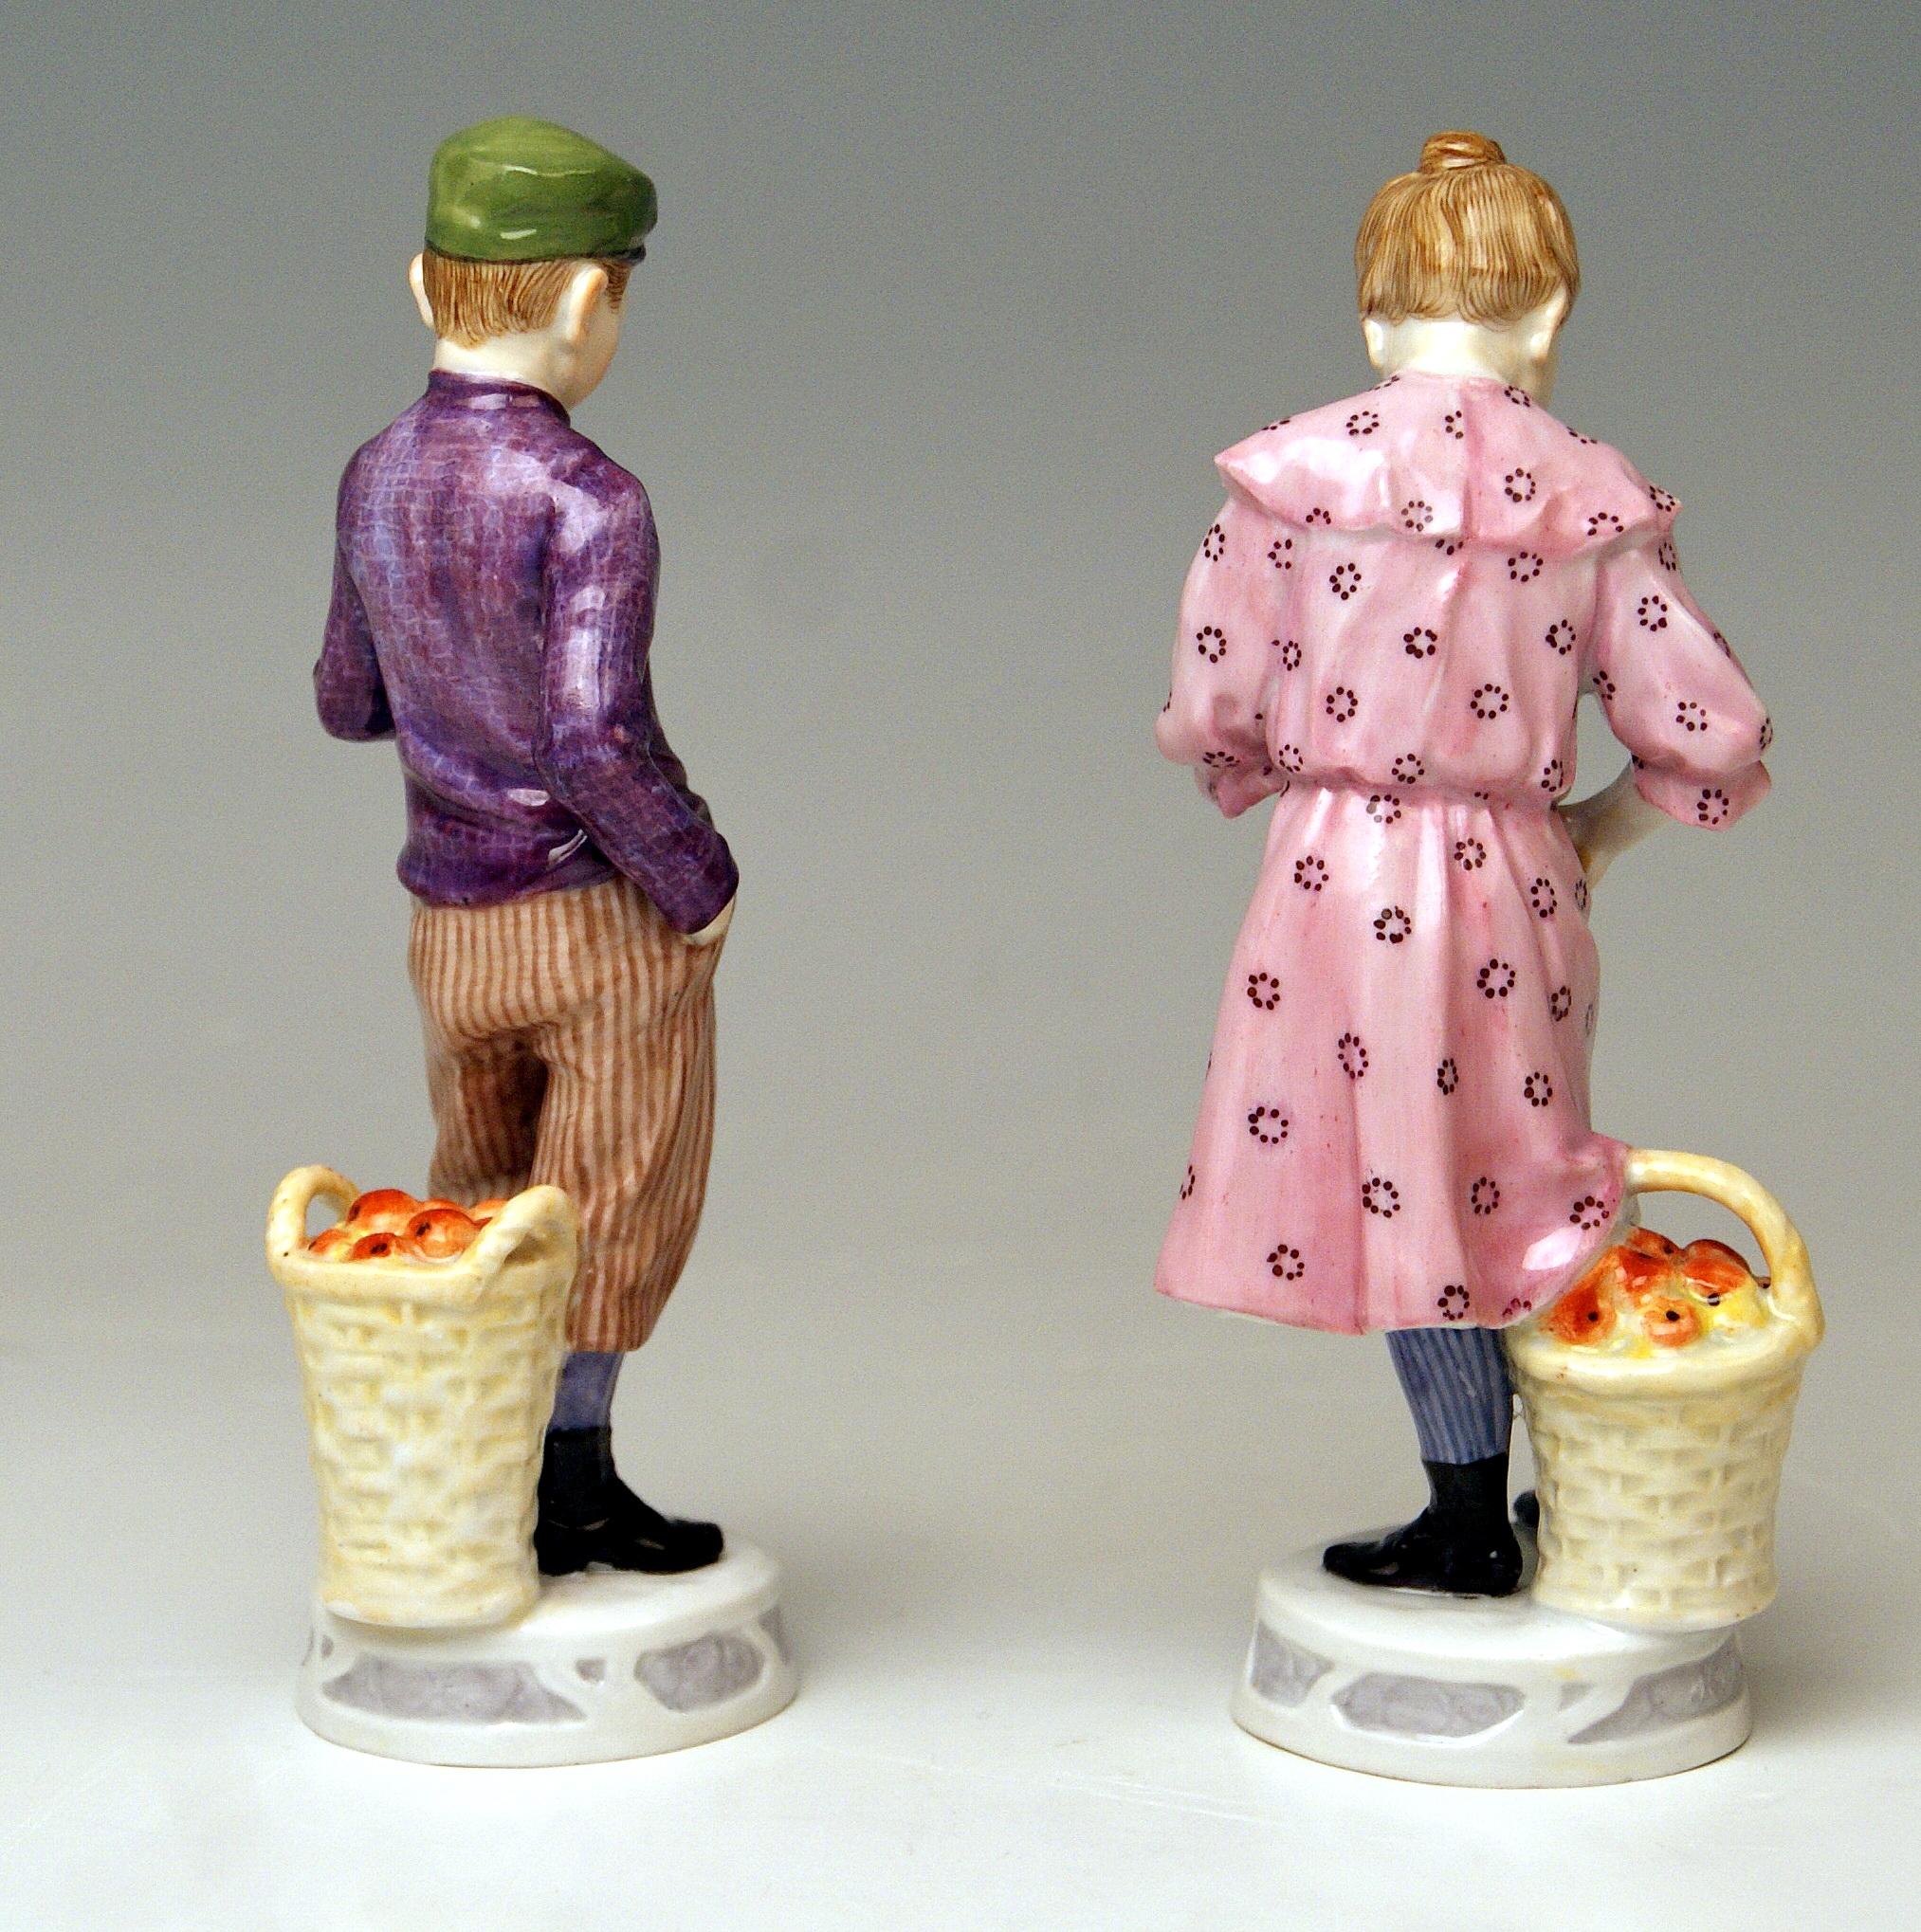 Painted Meissen Art Nouveau Children Boy and Girl with Apples X 187 188 by Koenig